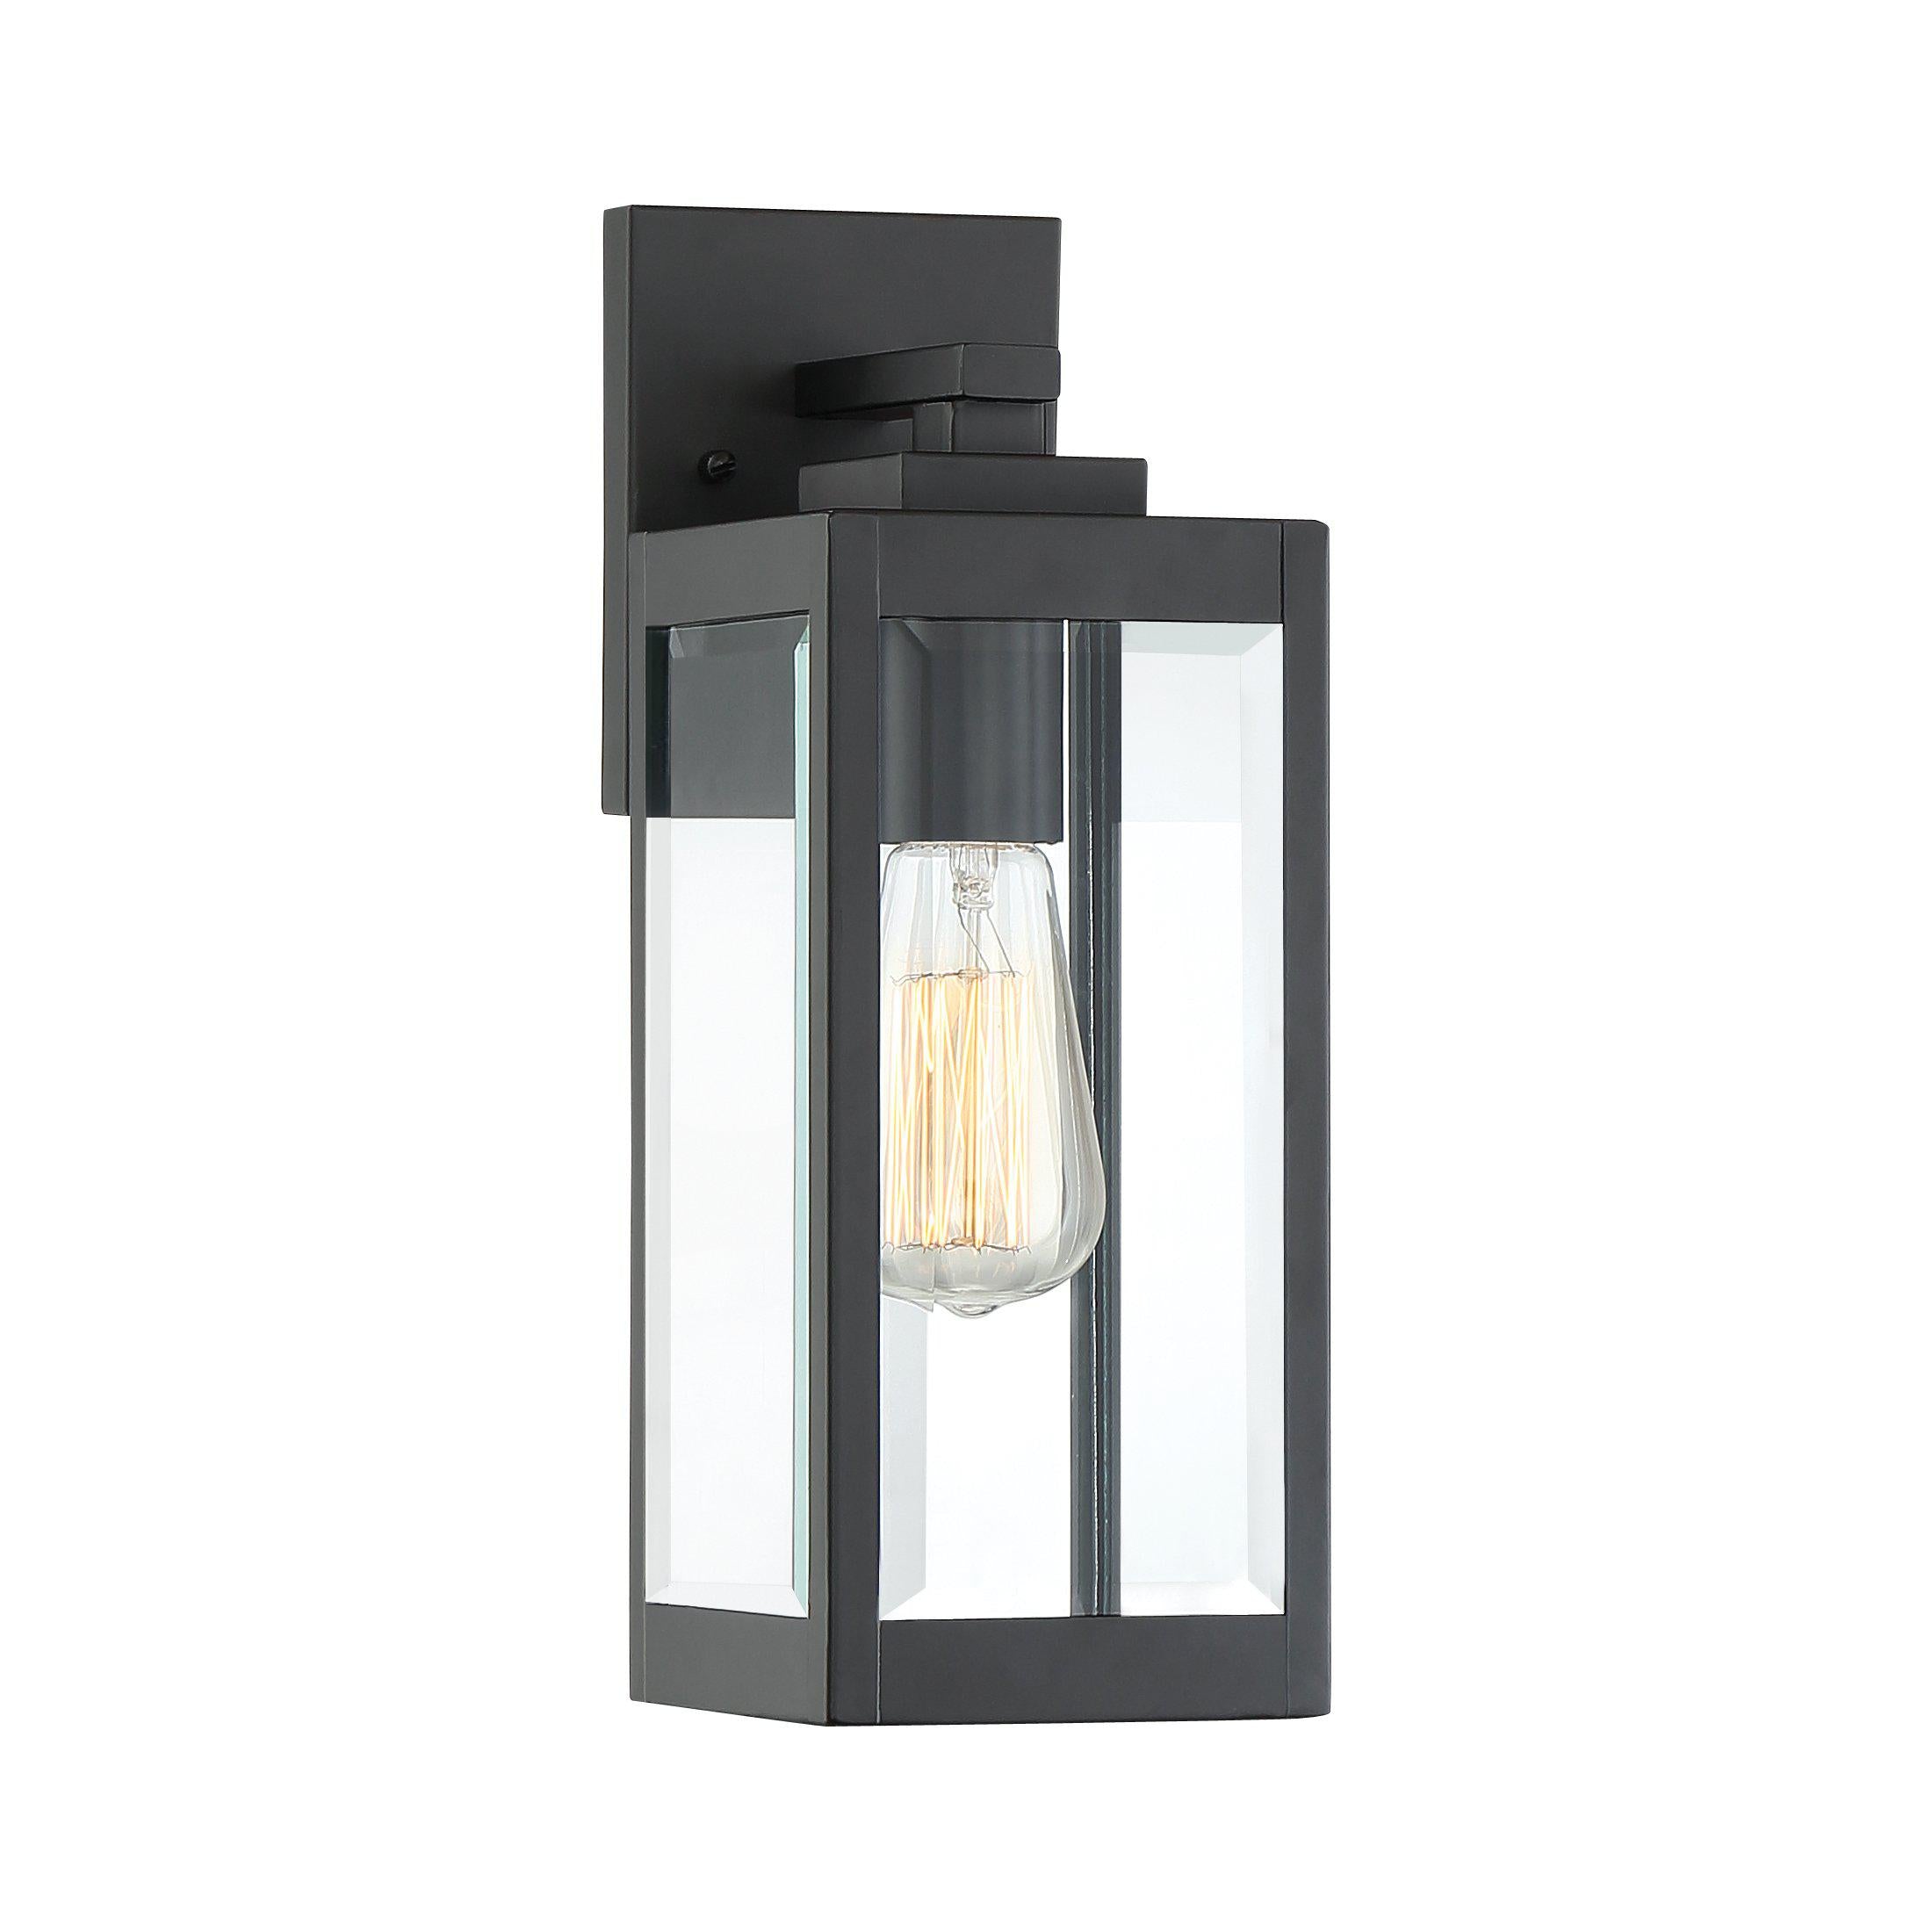 Quoizel  Westover Outdoor Lantern, Small WVR8405 Outdoor l Wall Quoizel Earth Black  